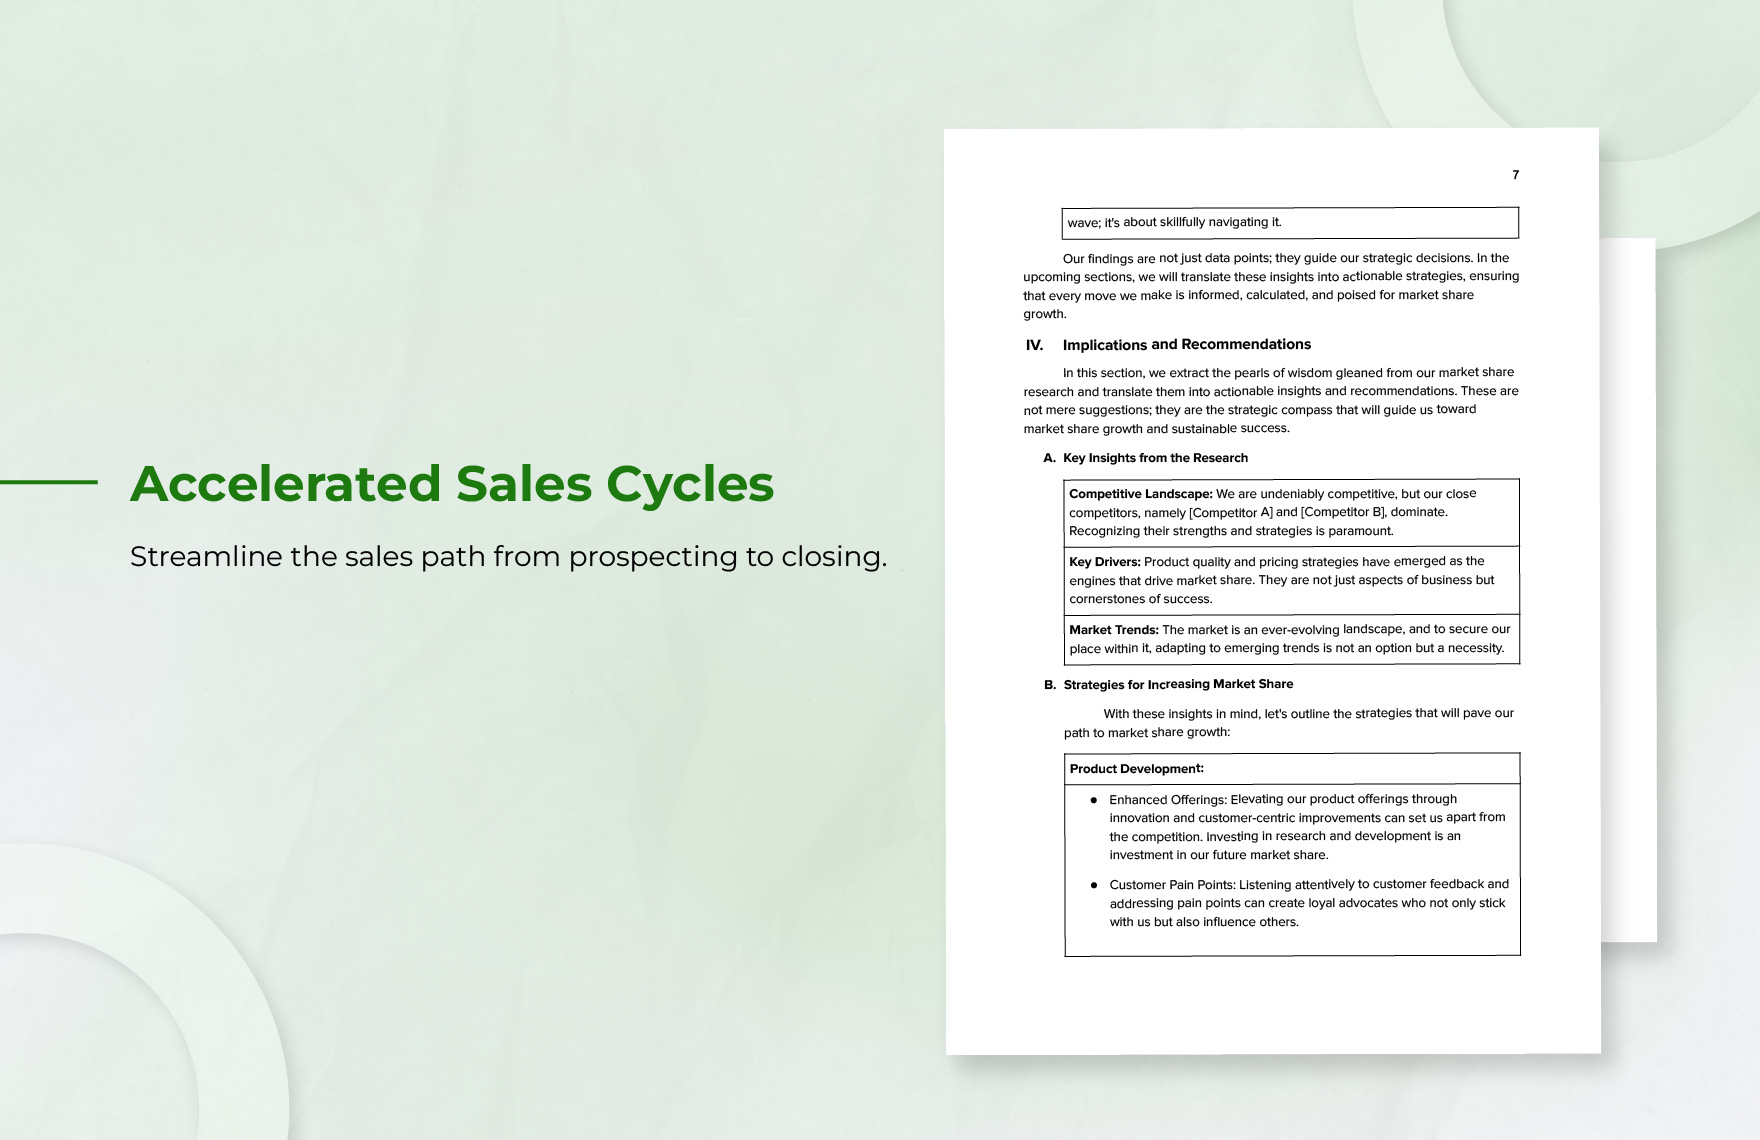 Sales Market Share Research Template